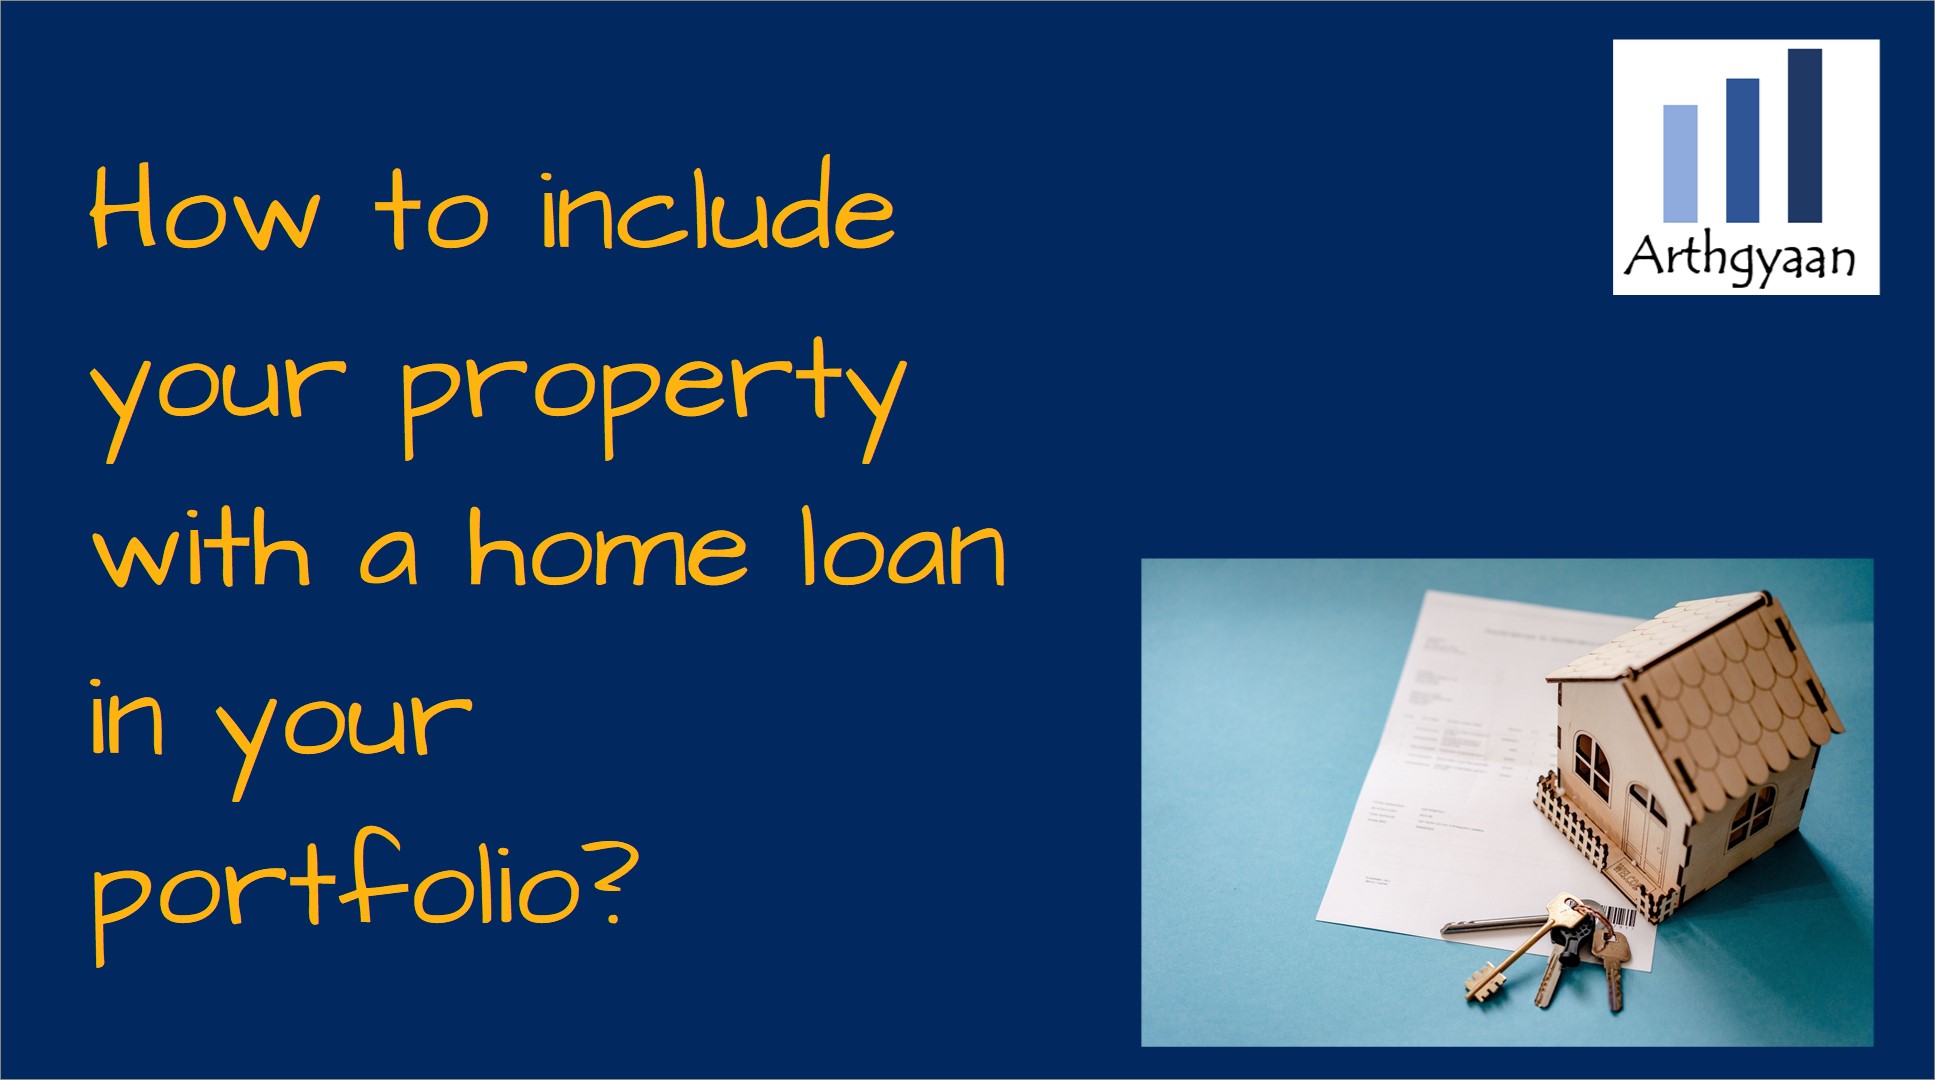 How to include your property with a home loan in your portfolio?